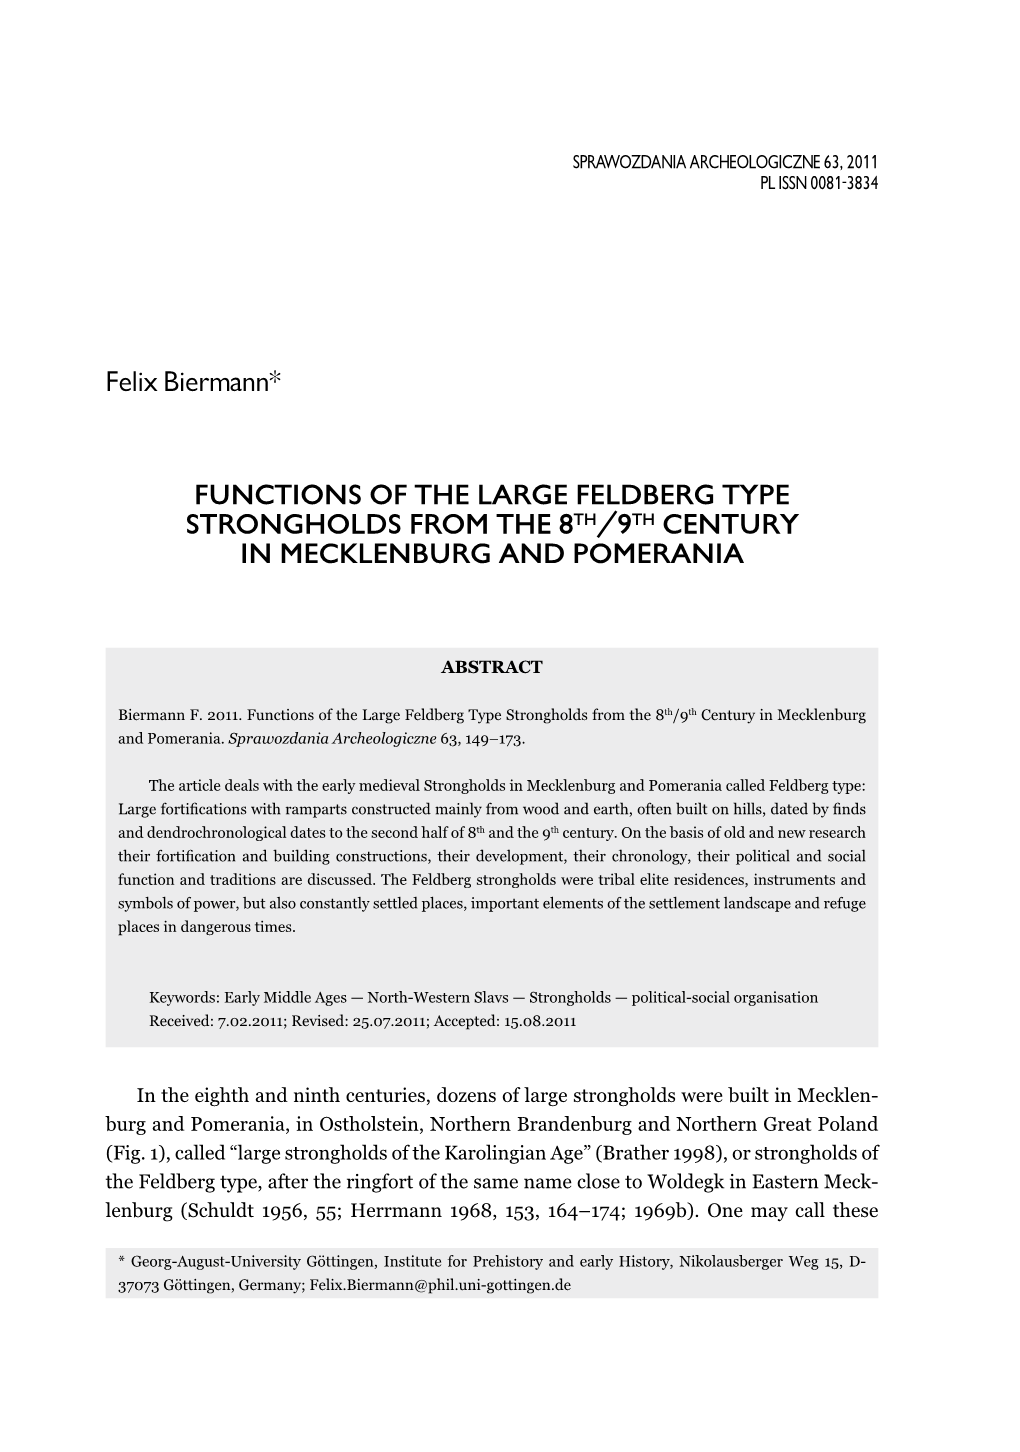 Functions of the Large Feldberg Type Strongholds from the 8Th/9Th Century in Mecklenburg and Pomerania